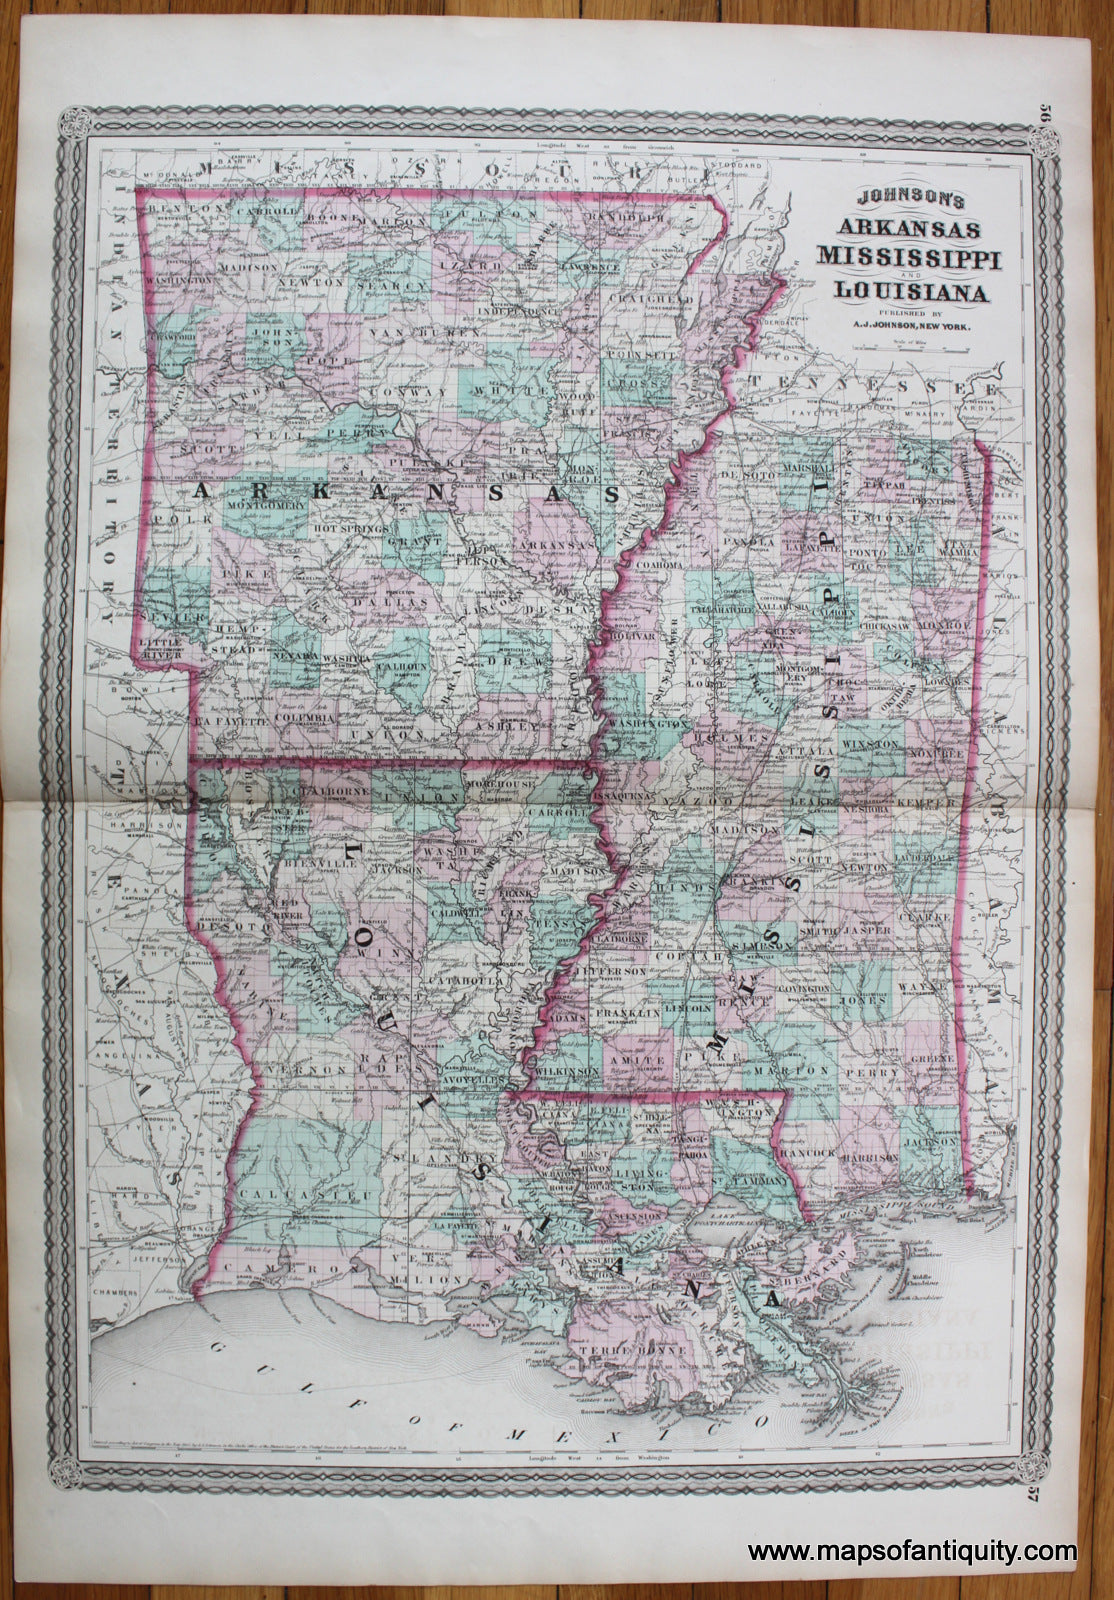 Antique-Hand-Colored-Map-Johnson's-Arkansas-Mississippi-and-Louisiana---1866-Johnson-Maps-Of-Antiquity